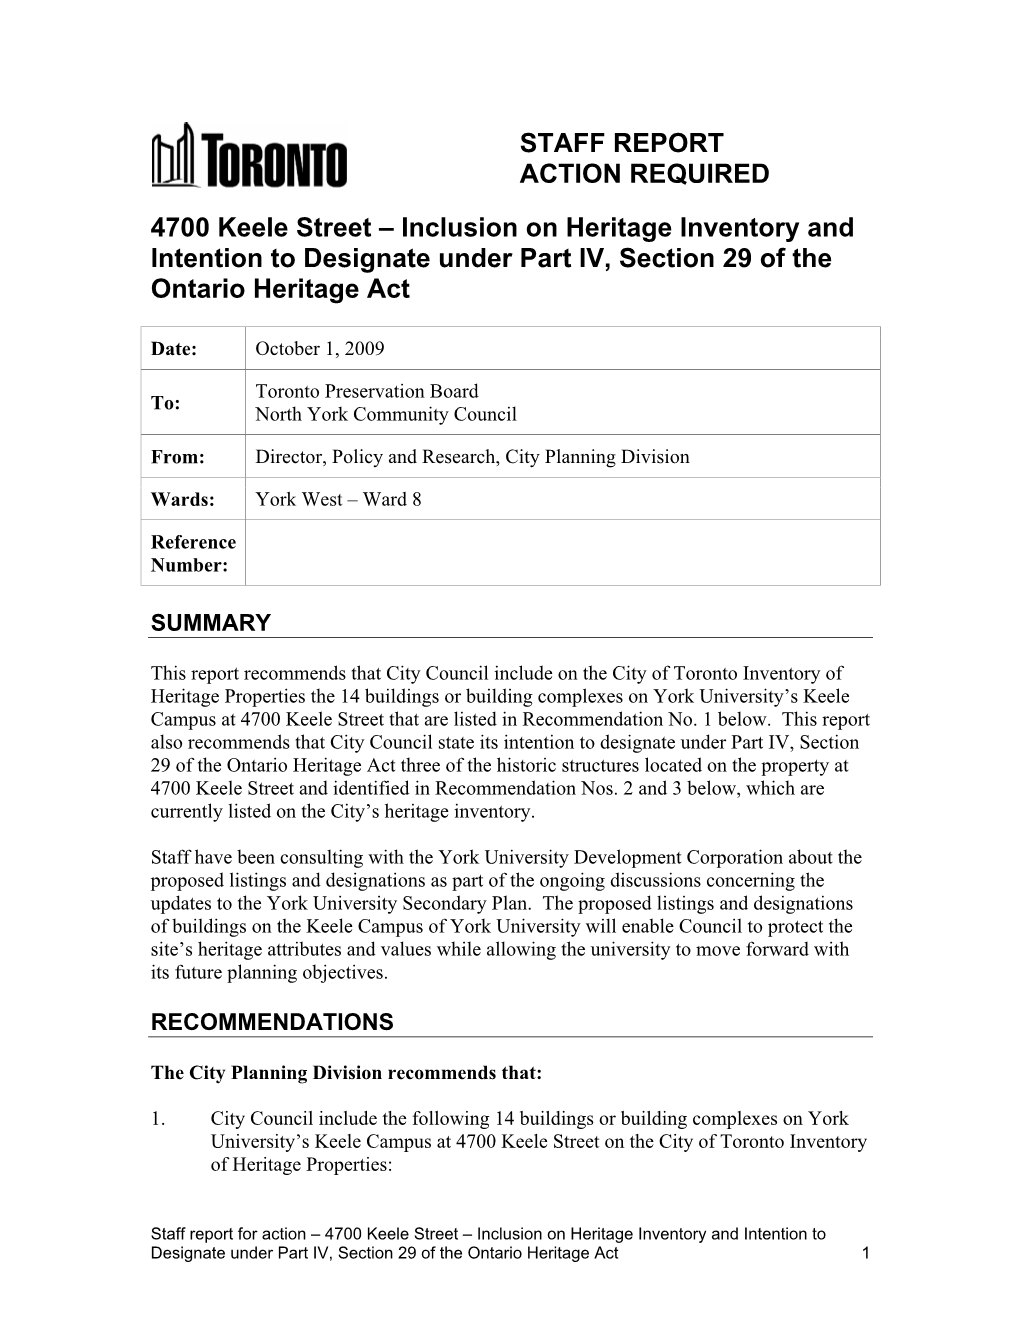 STAFF REPORT ACTION REQUIRED 4700 Keele Street – Inclusion on Heritage Inventory and Intention to Designate Under Part IV, Section 29 of the Ontario Heritage Act